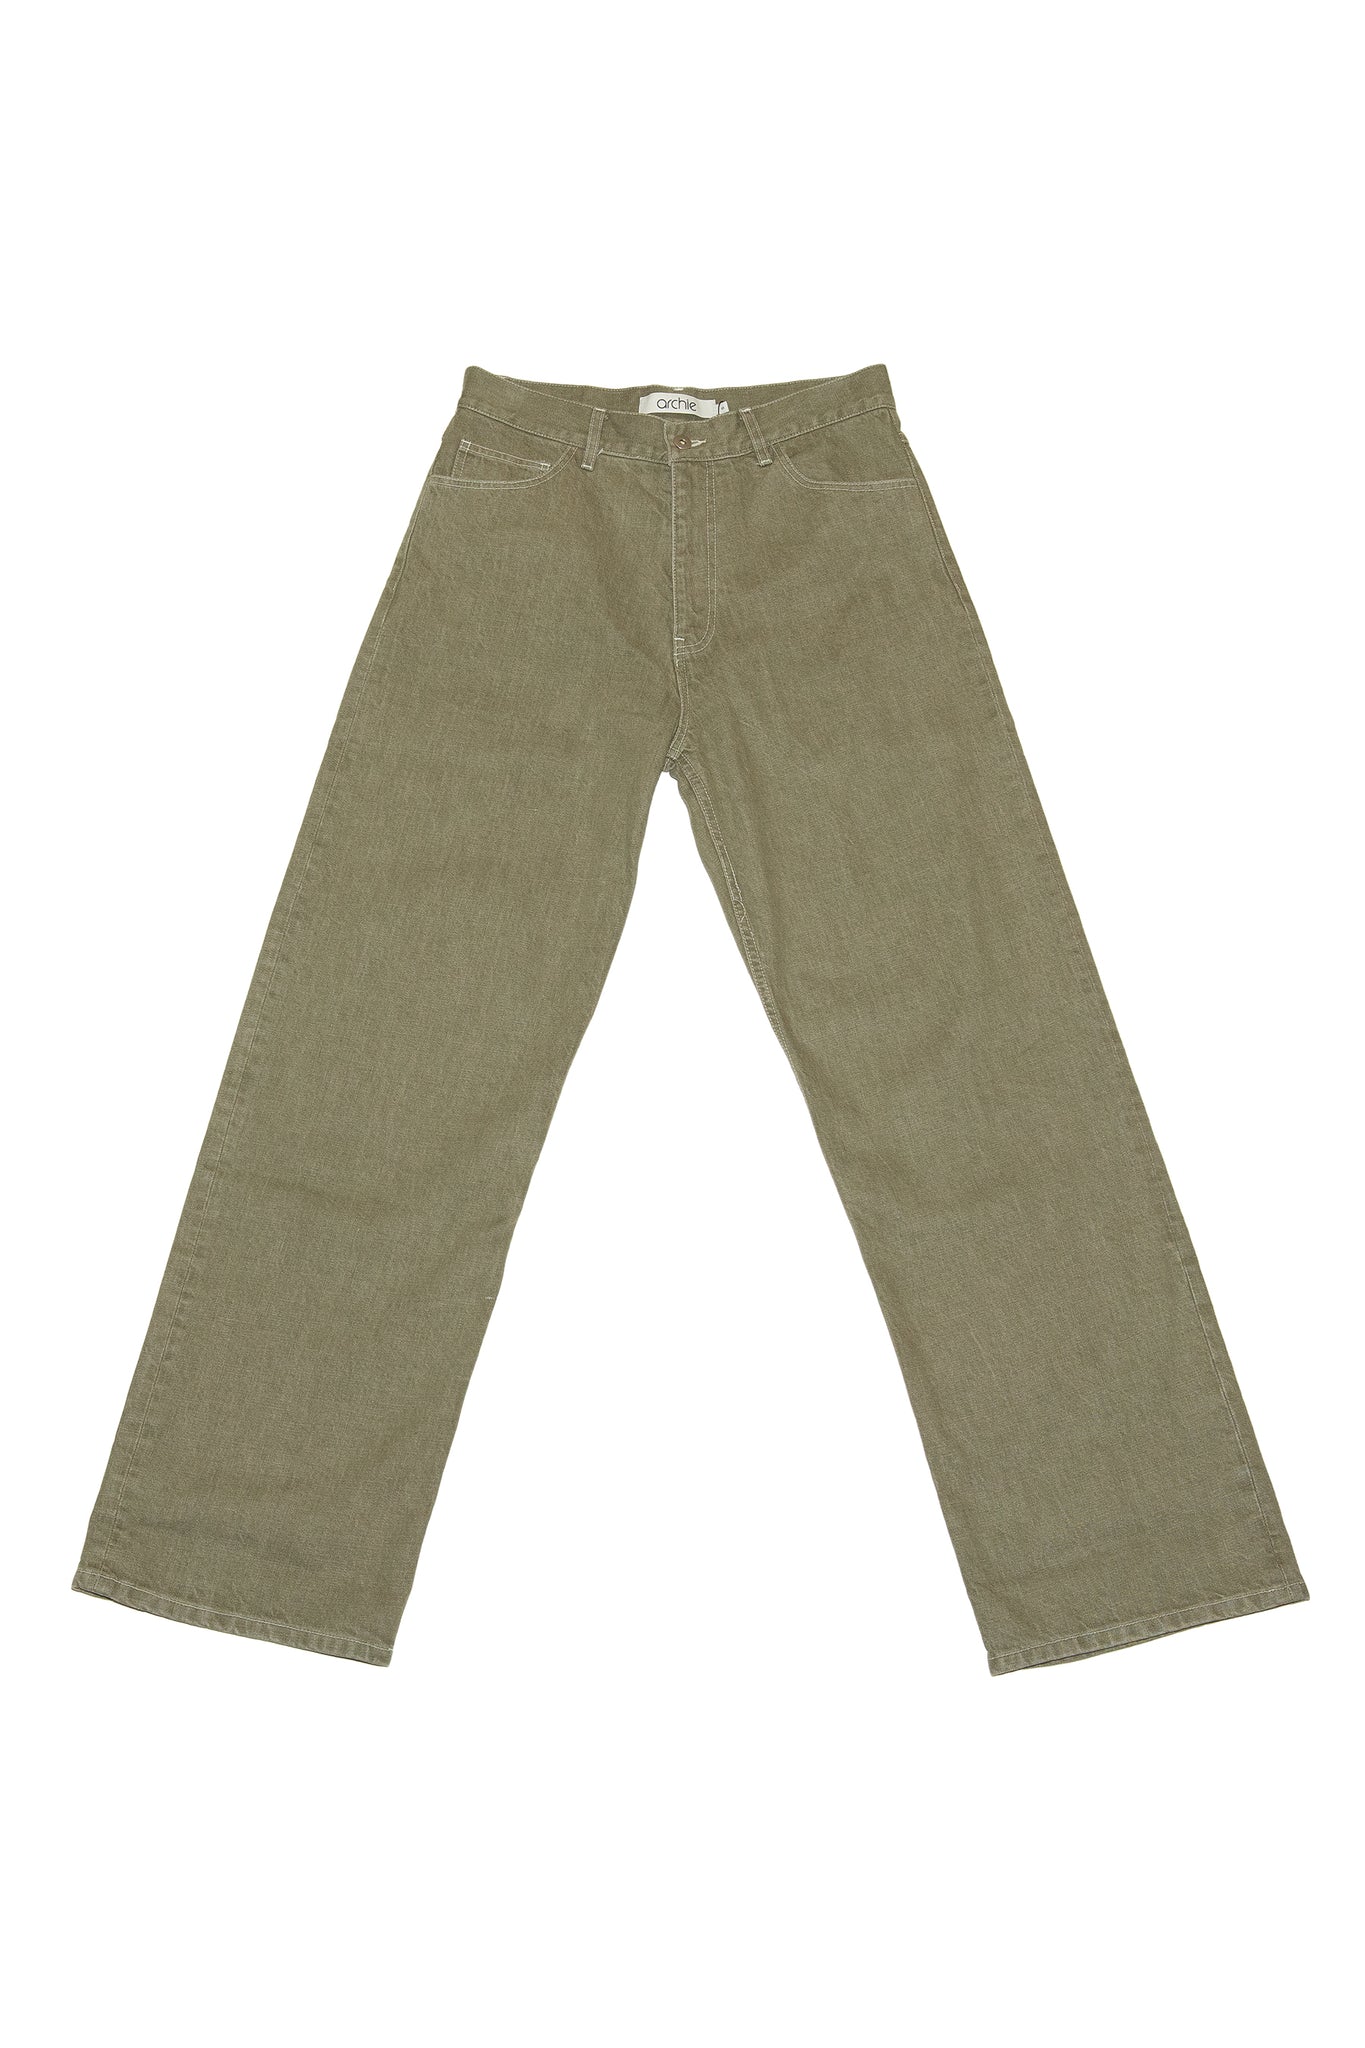 ARCHIE - JEANS IN KHAKI